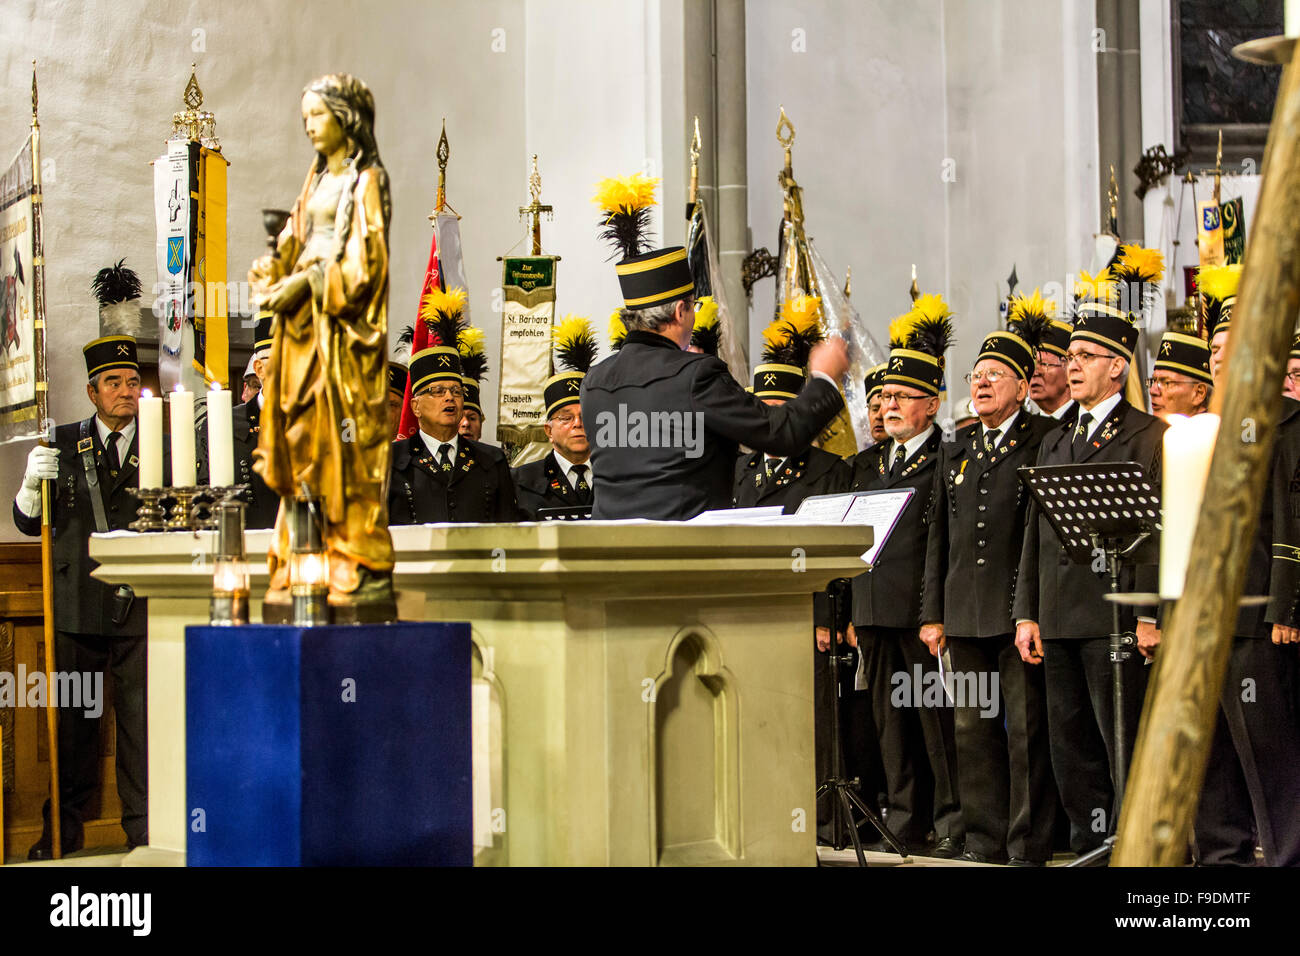 Annual meeting of historic coal miners association,  in typical dress uniform, with a parade and ecumenical service, Bochum, GER Stock Photo